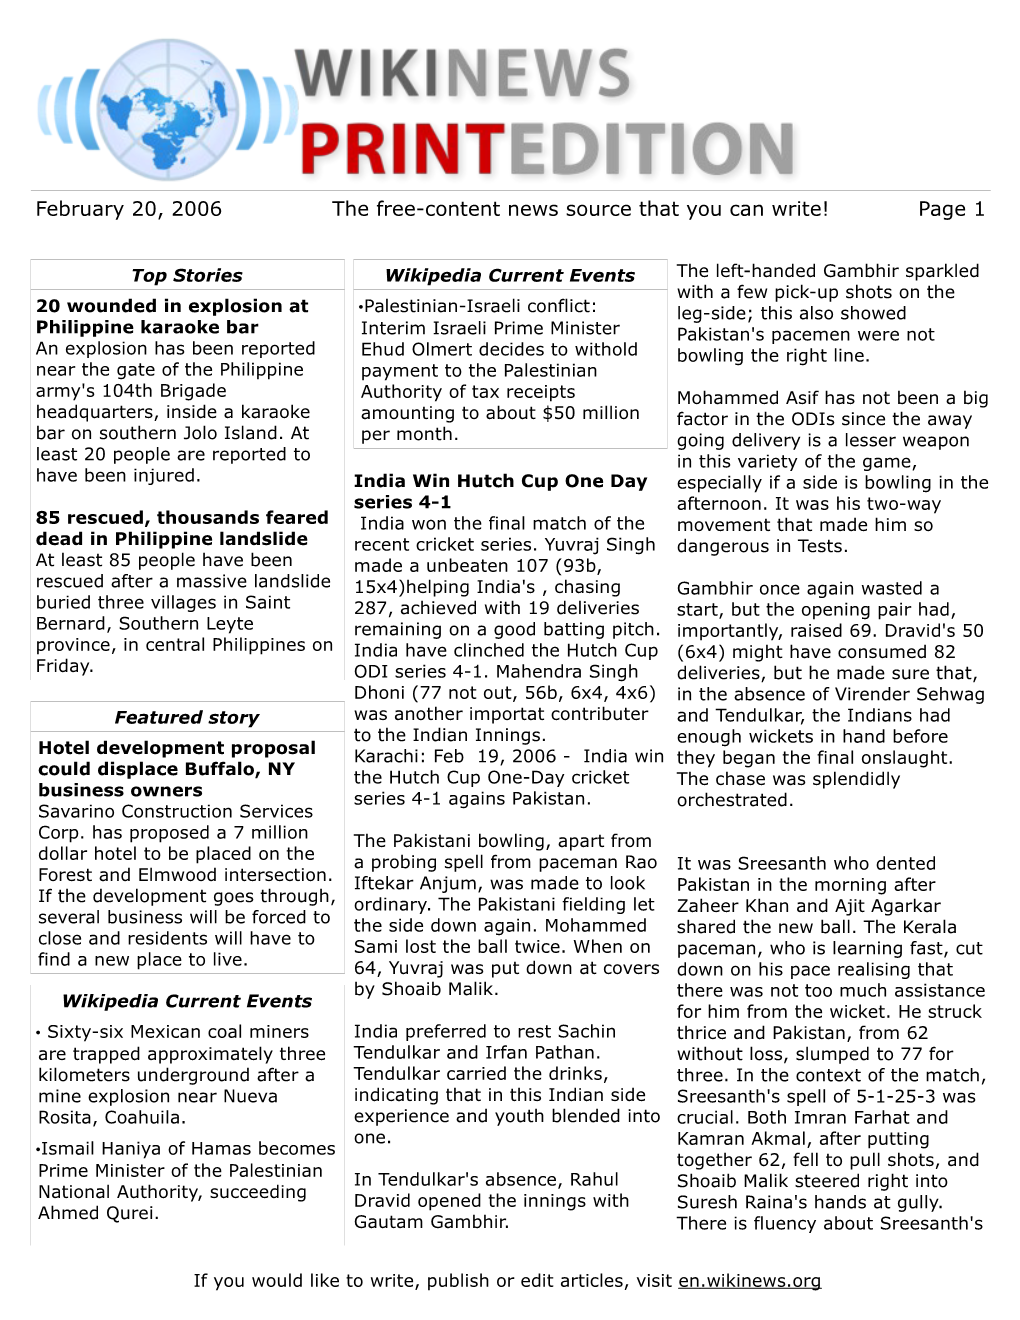 February 20, 2006 the Free-Content News Source That You Can Write! Page 1